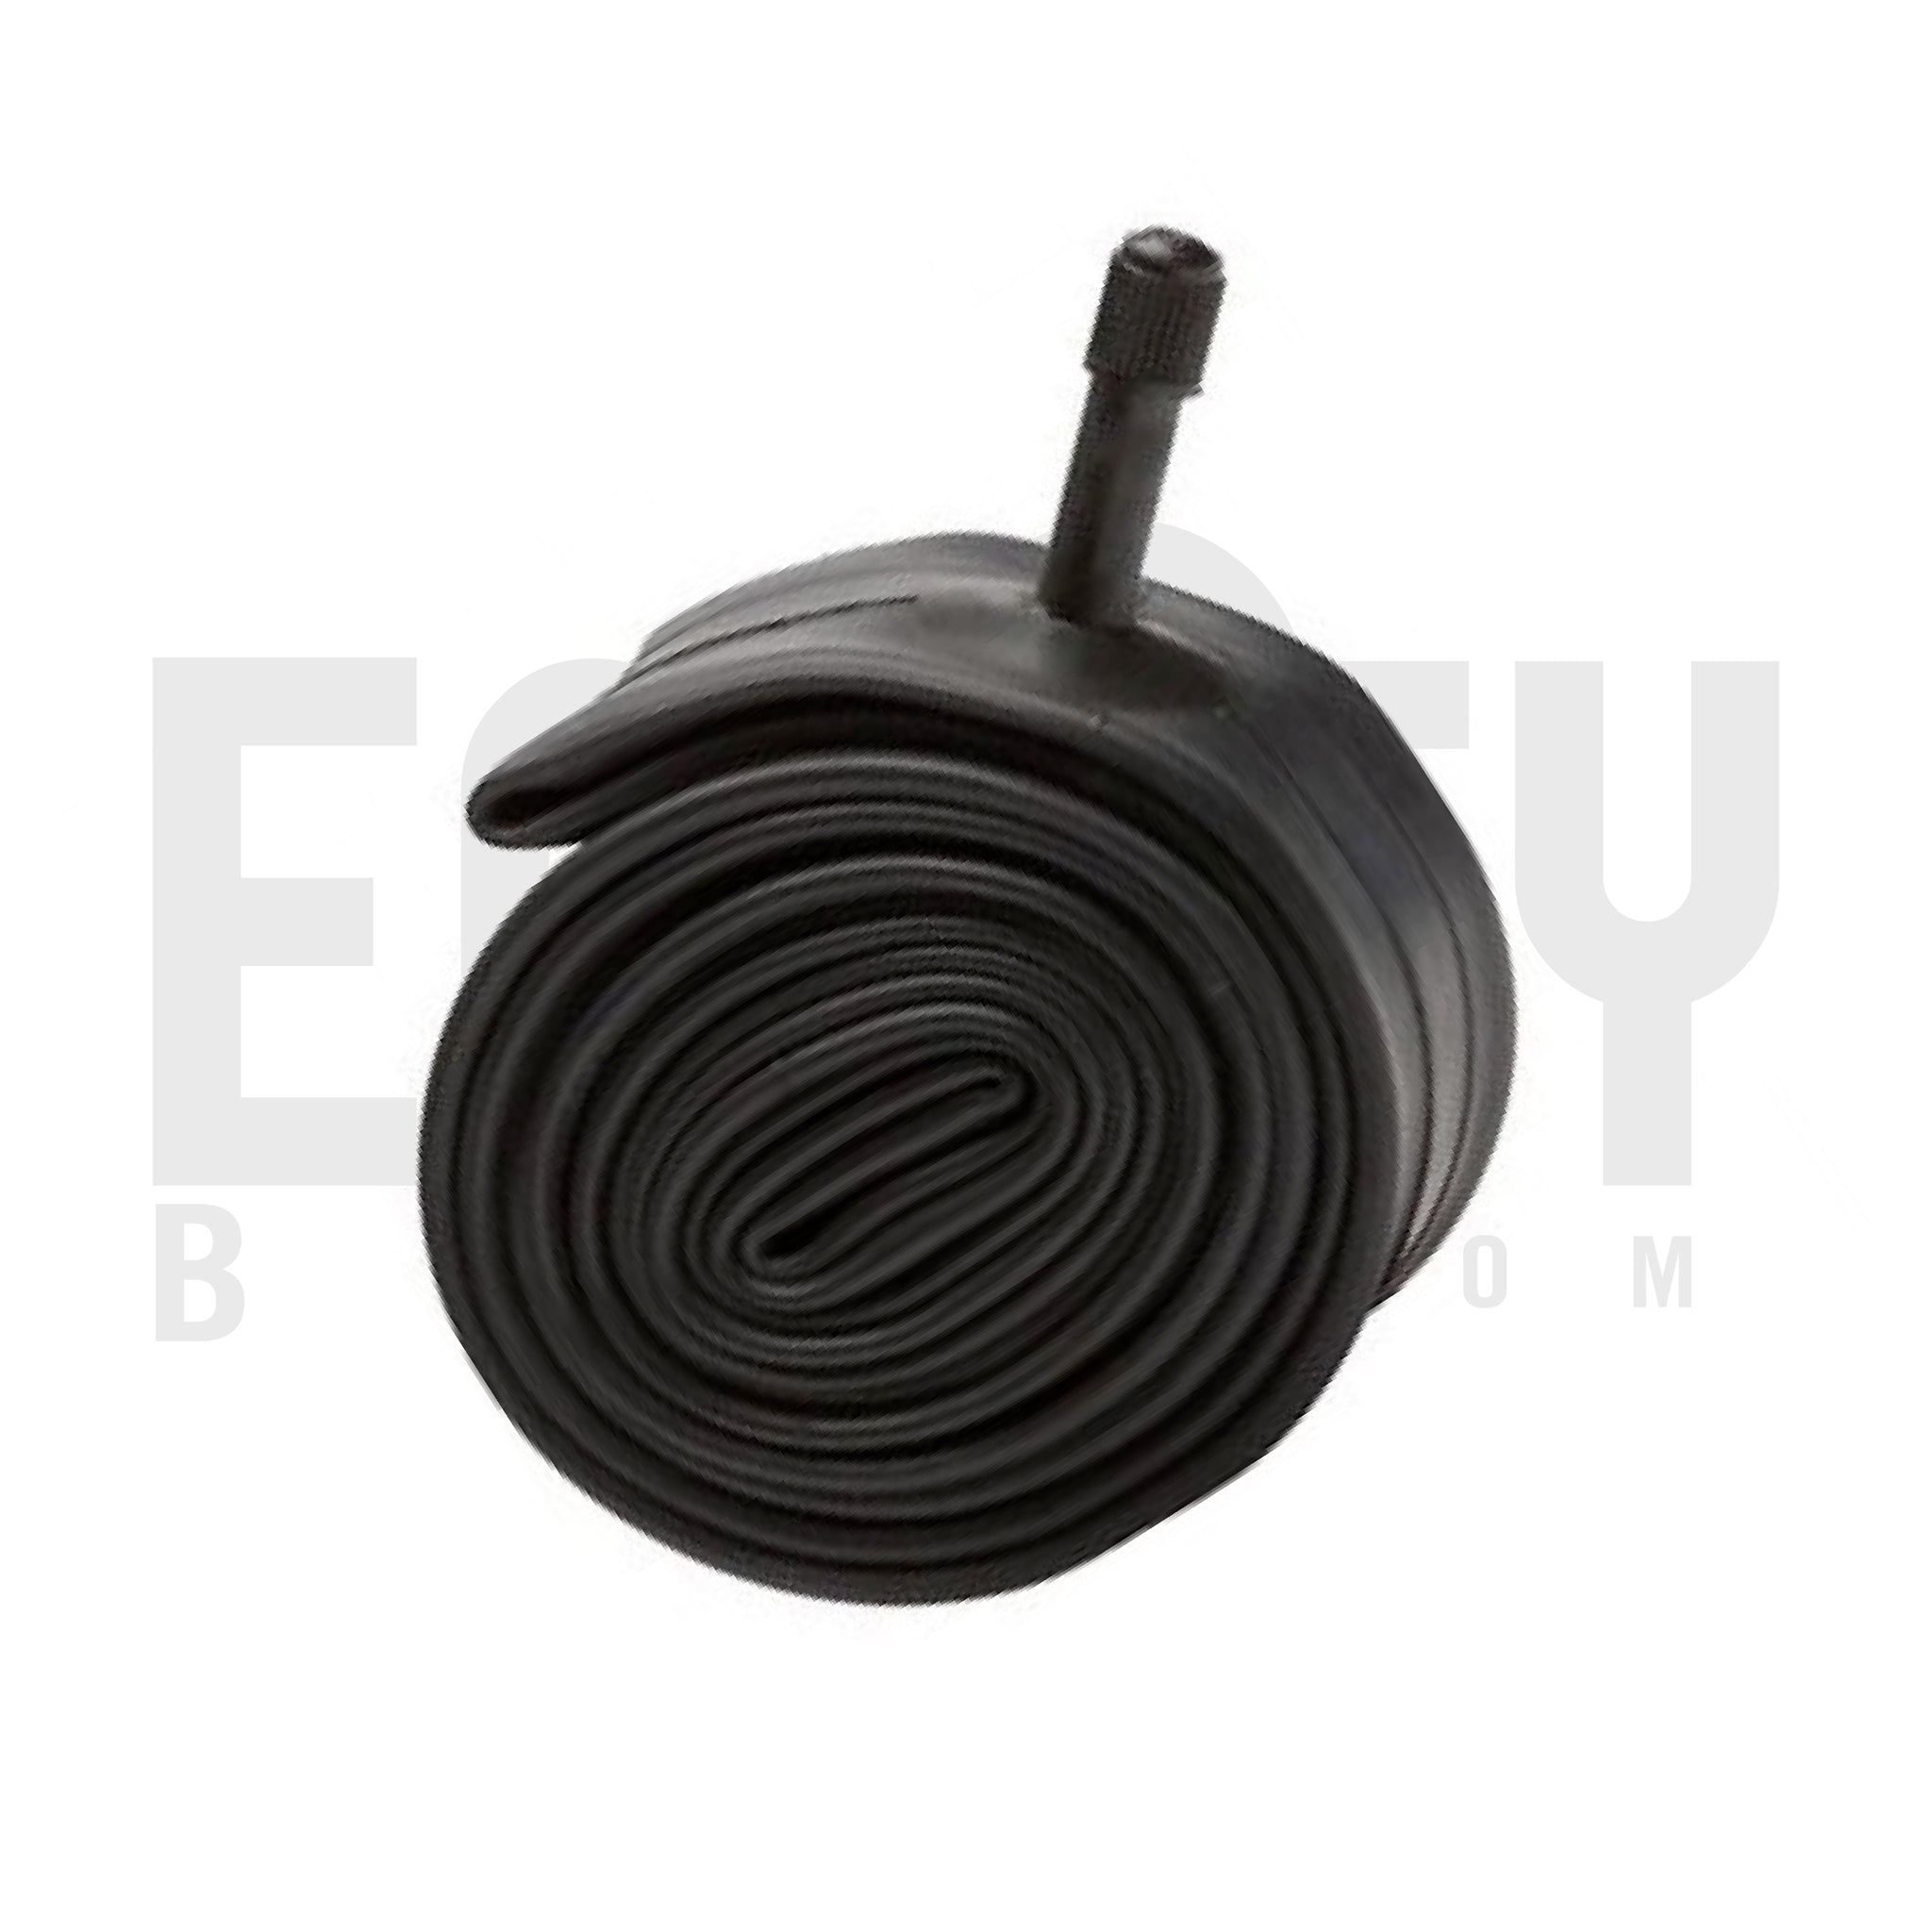 Entity BMX Shop Inner Tube (16, 18, 20 inch sizes available)